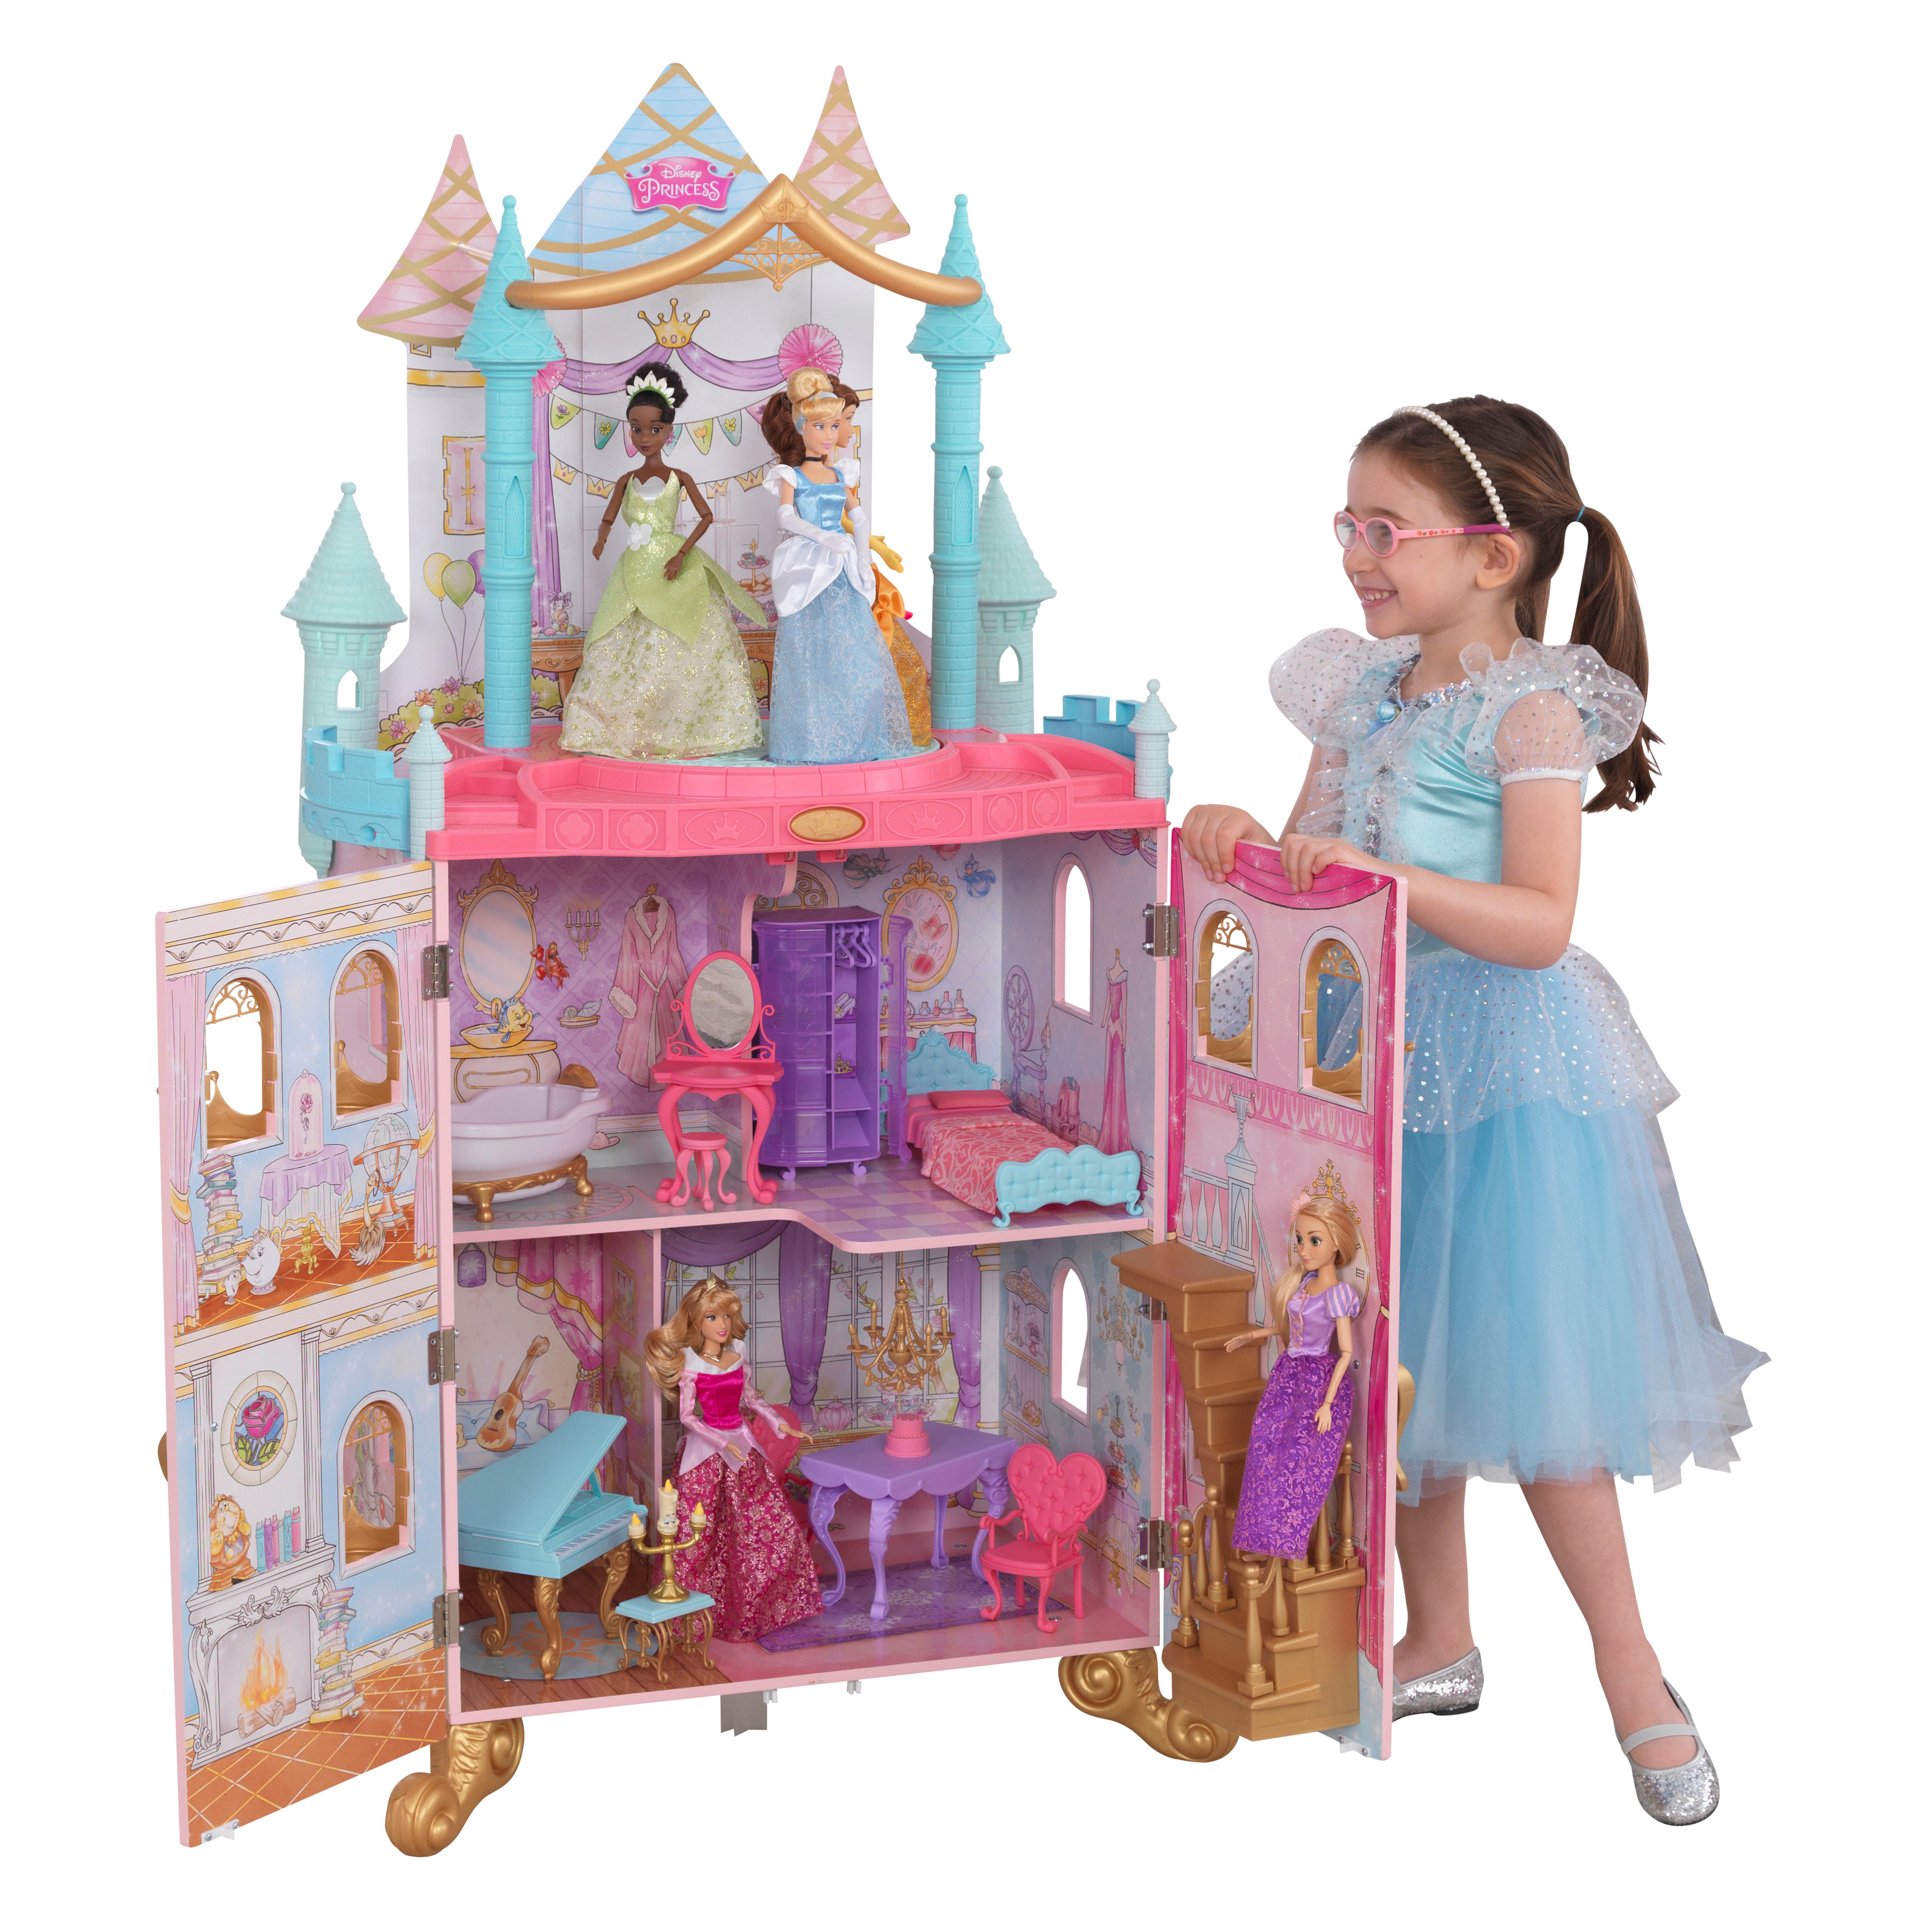 Disney Princess Dance & Dream Dollhouse By Kidkraft with 20 Accessories Included $79.58 Amazon and Walmart